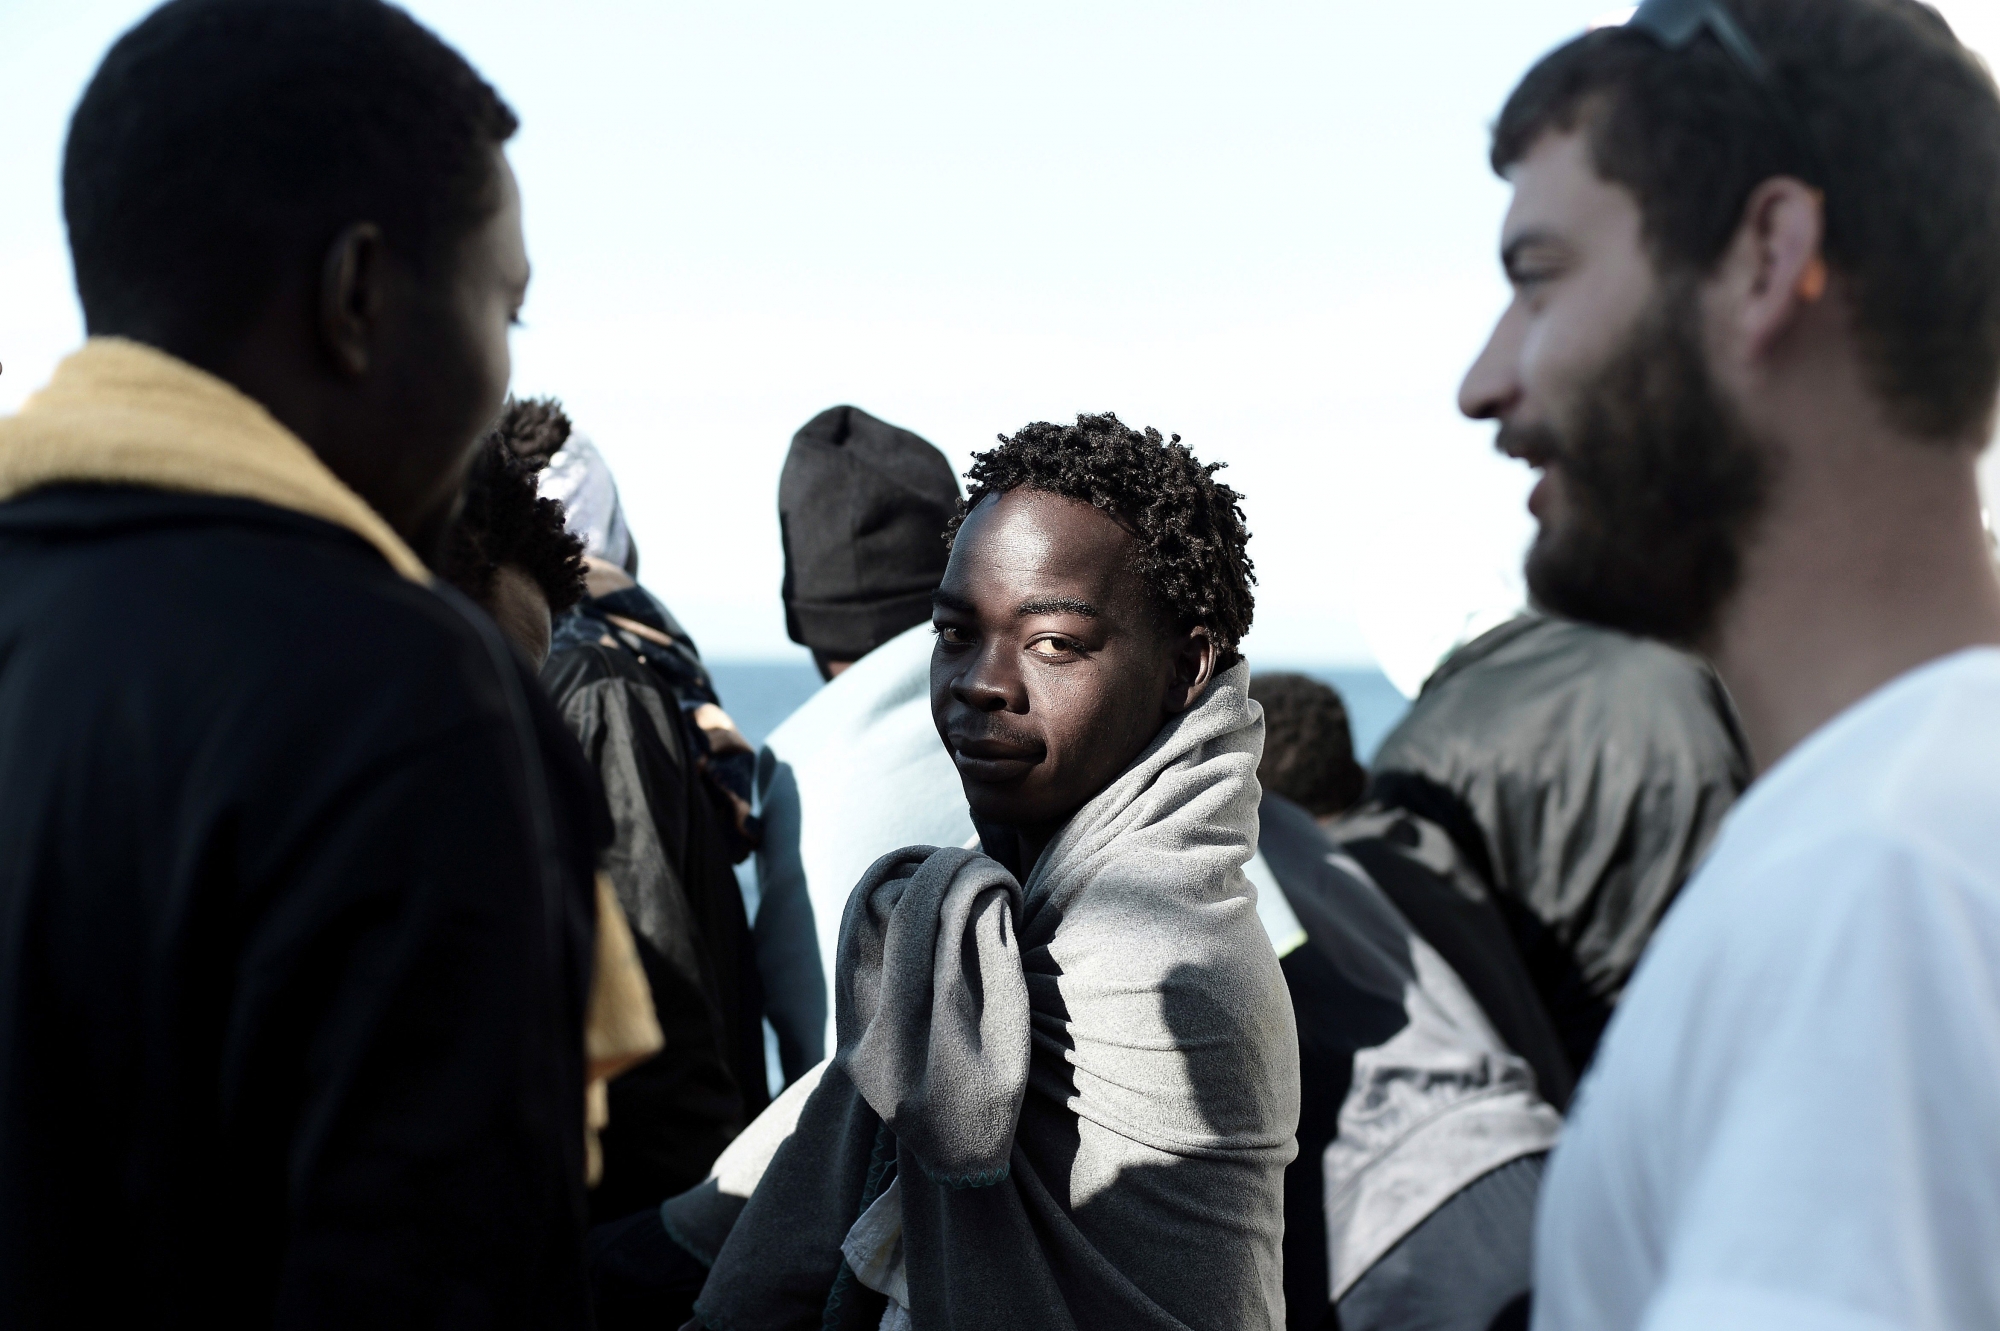 epa06815476 A handout picture made available by 'Doctors Without Borders' shows the last moments on board the 'Aquarius' rescue vessel before disembarking in Valencia, Spain, 17 June 2018. The 'Aquarius' rescue vessel of the European maritime-humanitarian organization 'SOS Mediterranee' carrying some 630 migrants rescued in the Mediterranean off the Libyan coast has been heading to Spain after both, Malta and Italy, refused the ship to enter either countries.  EPA/MSF HANDOUT  HANDOUT EDITORIAL USE ONLY/NO SALES SPAIN MIGRATION AQUARIUS SEA RESCUE